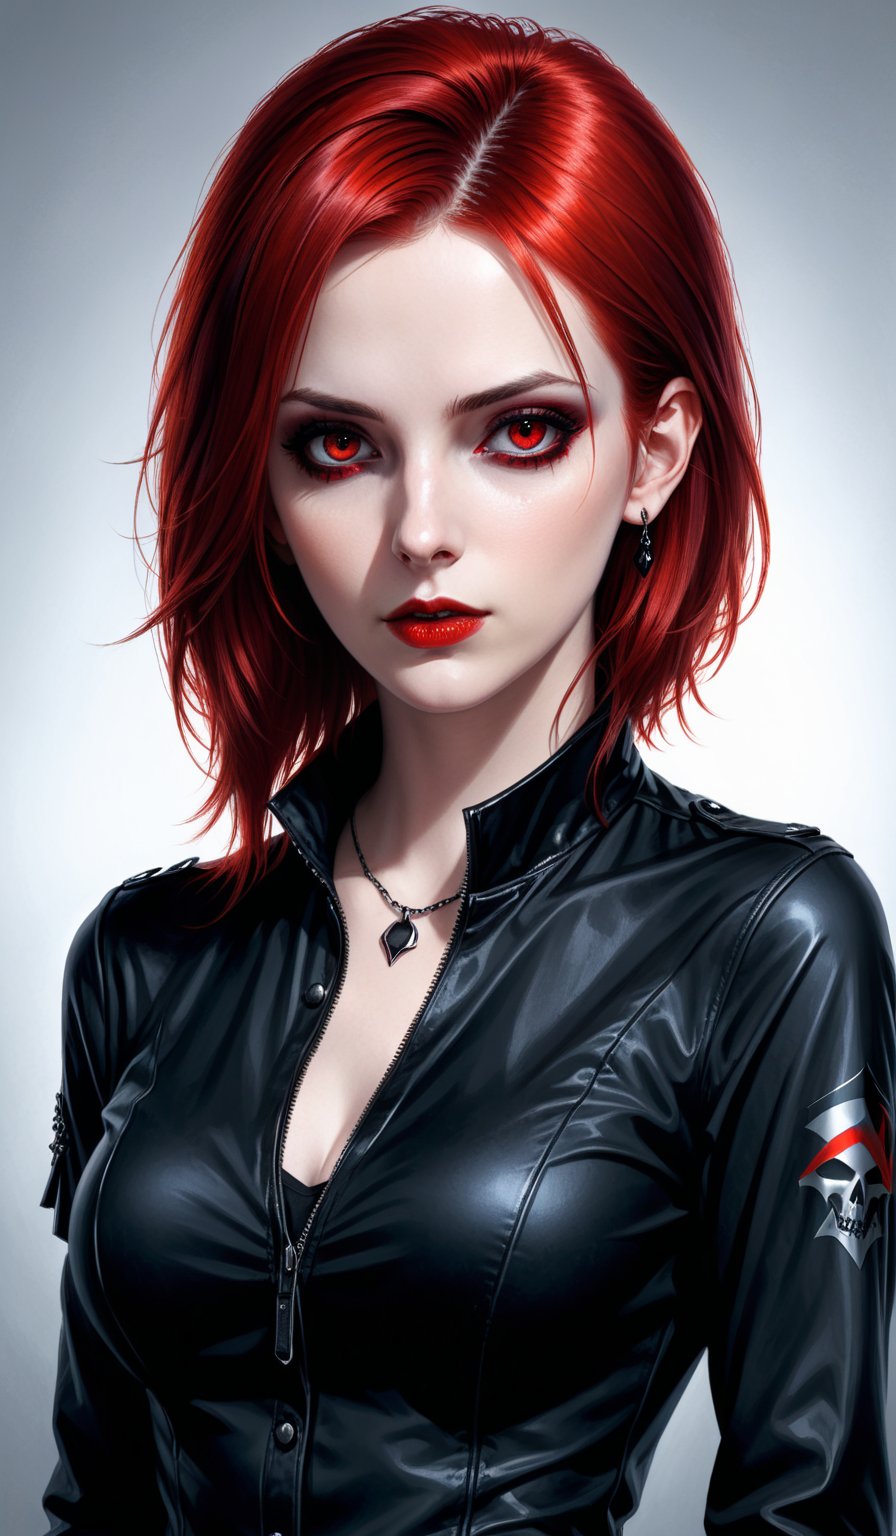 score_9, score_8_up, score_7_up, score_6_up, masterpiece,best quality,illustration,style of Realistic portrait of dark Goth Casual woman,Red Hair,Red eyes,glossy skin,